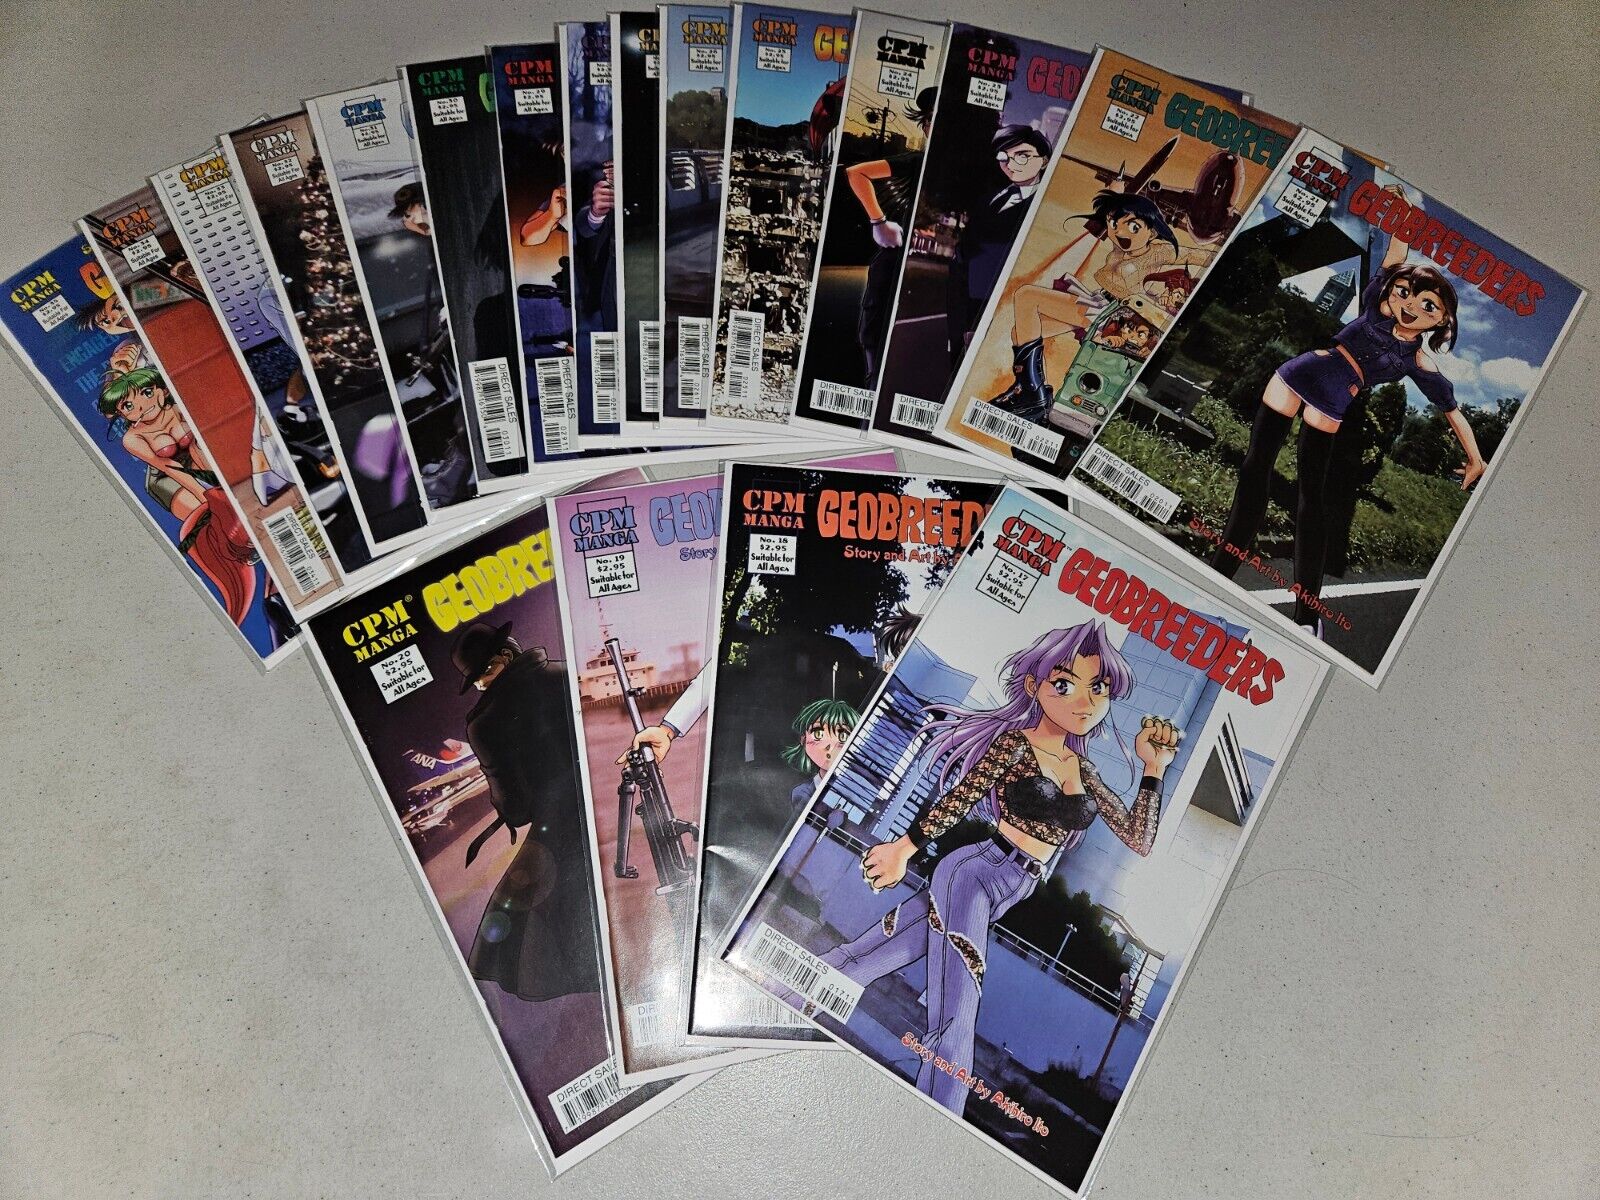 Geobreeders #17-35 (Complete, Final 19 issues of the CPM #1-35 series) Lot Set